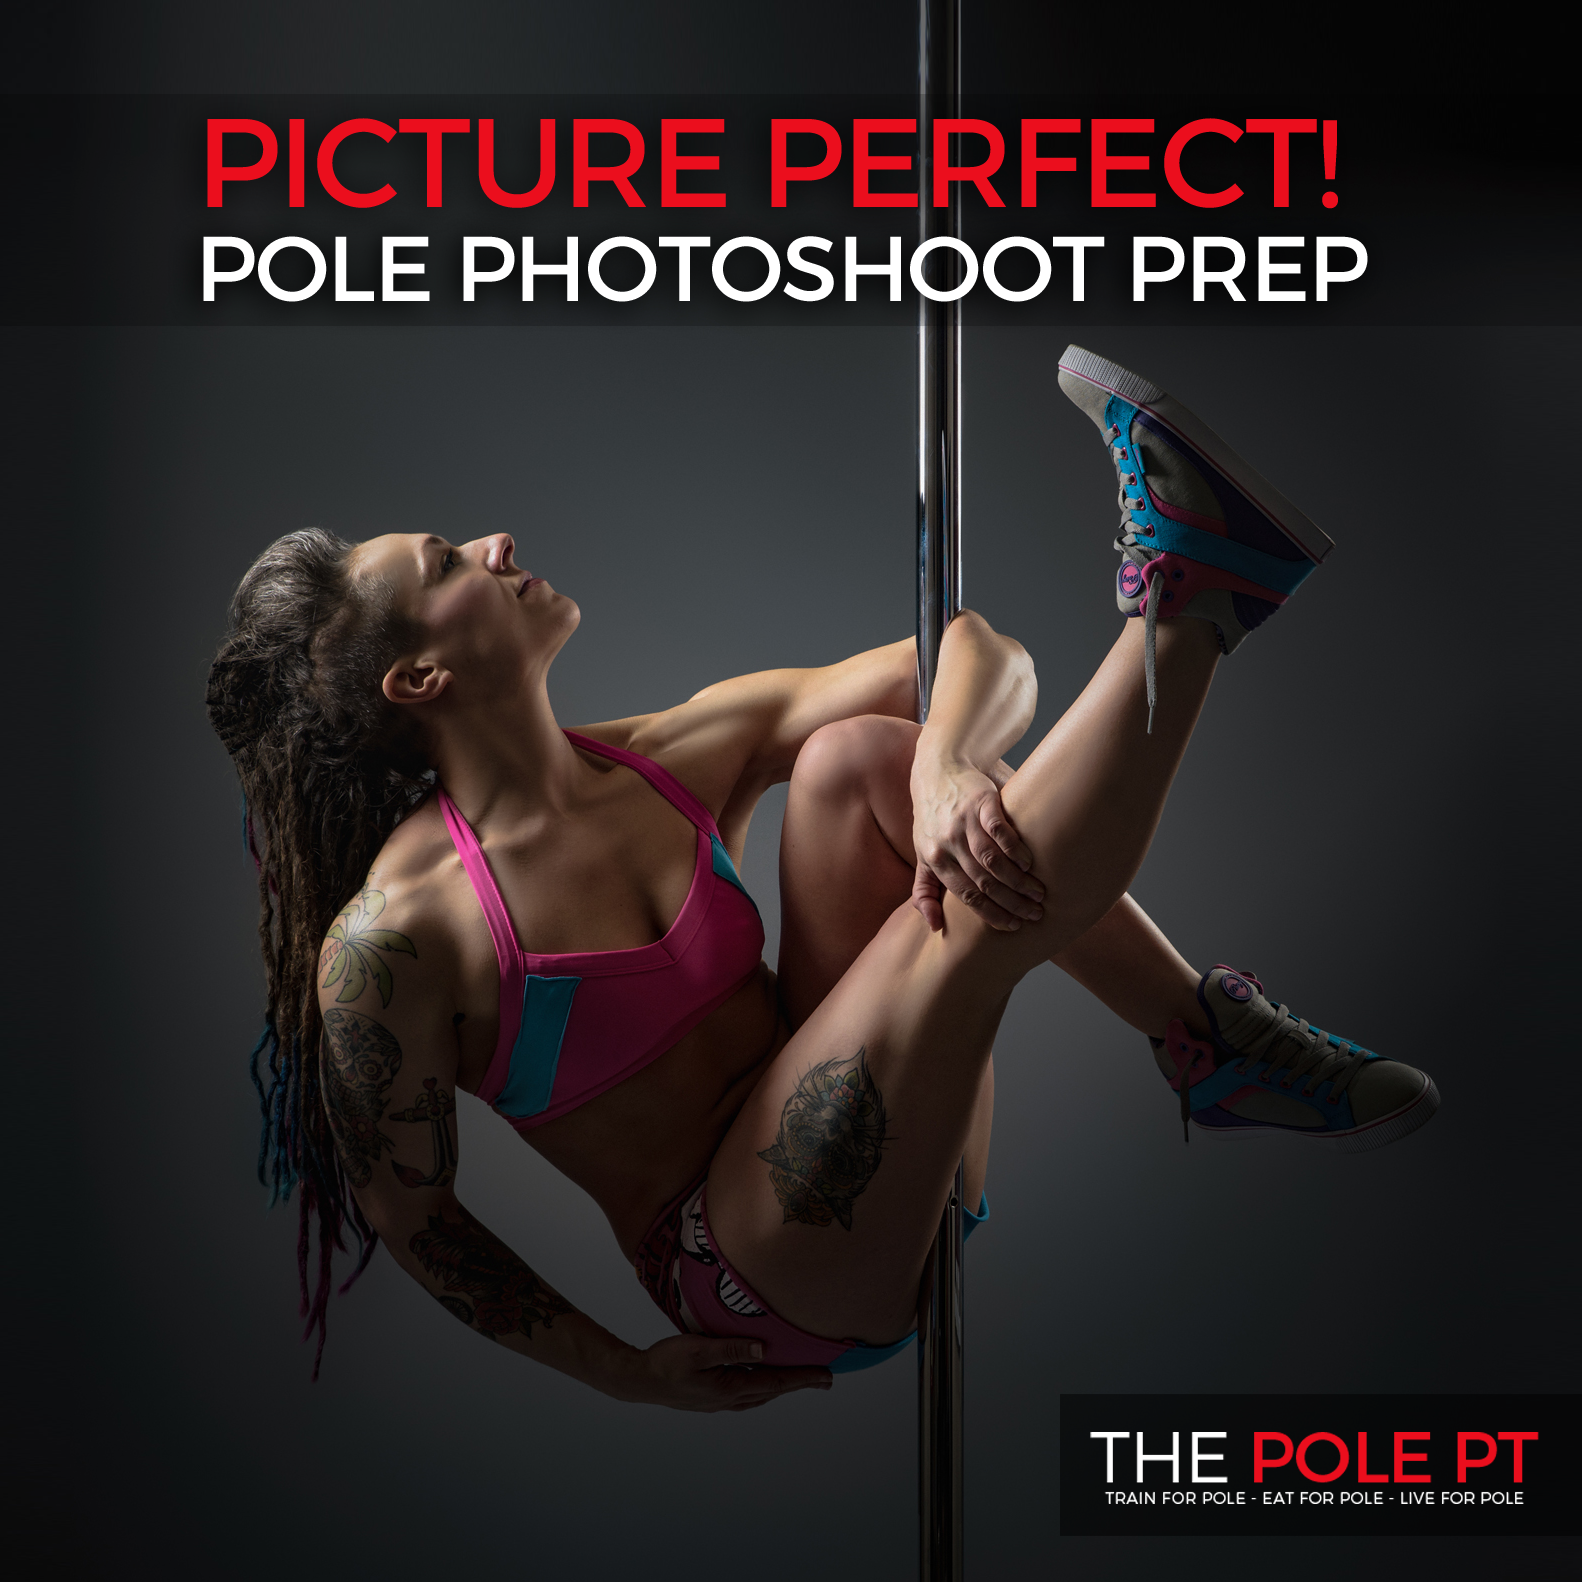 Pole photoshoot prep like a boss: 10 tips to picture perfect